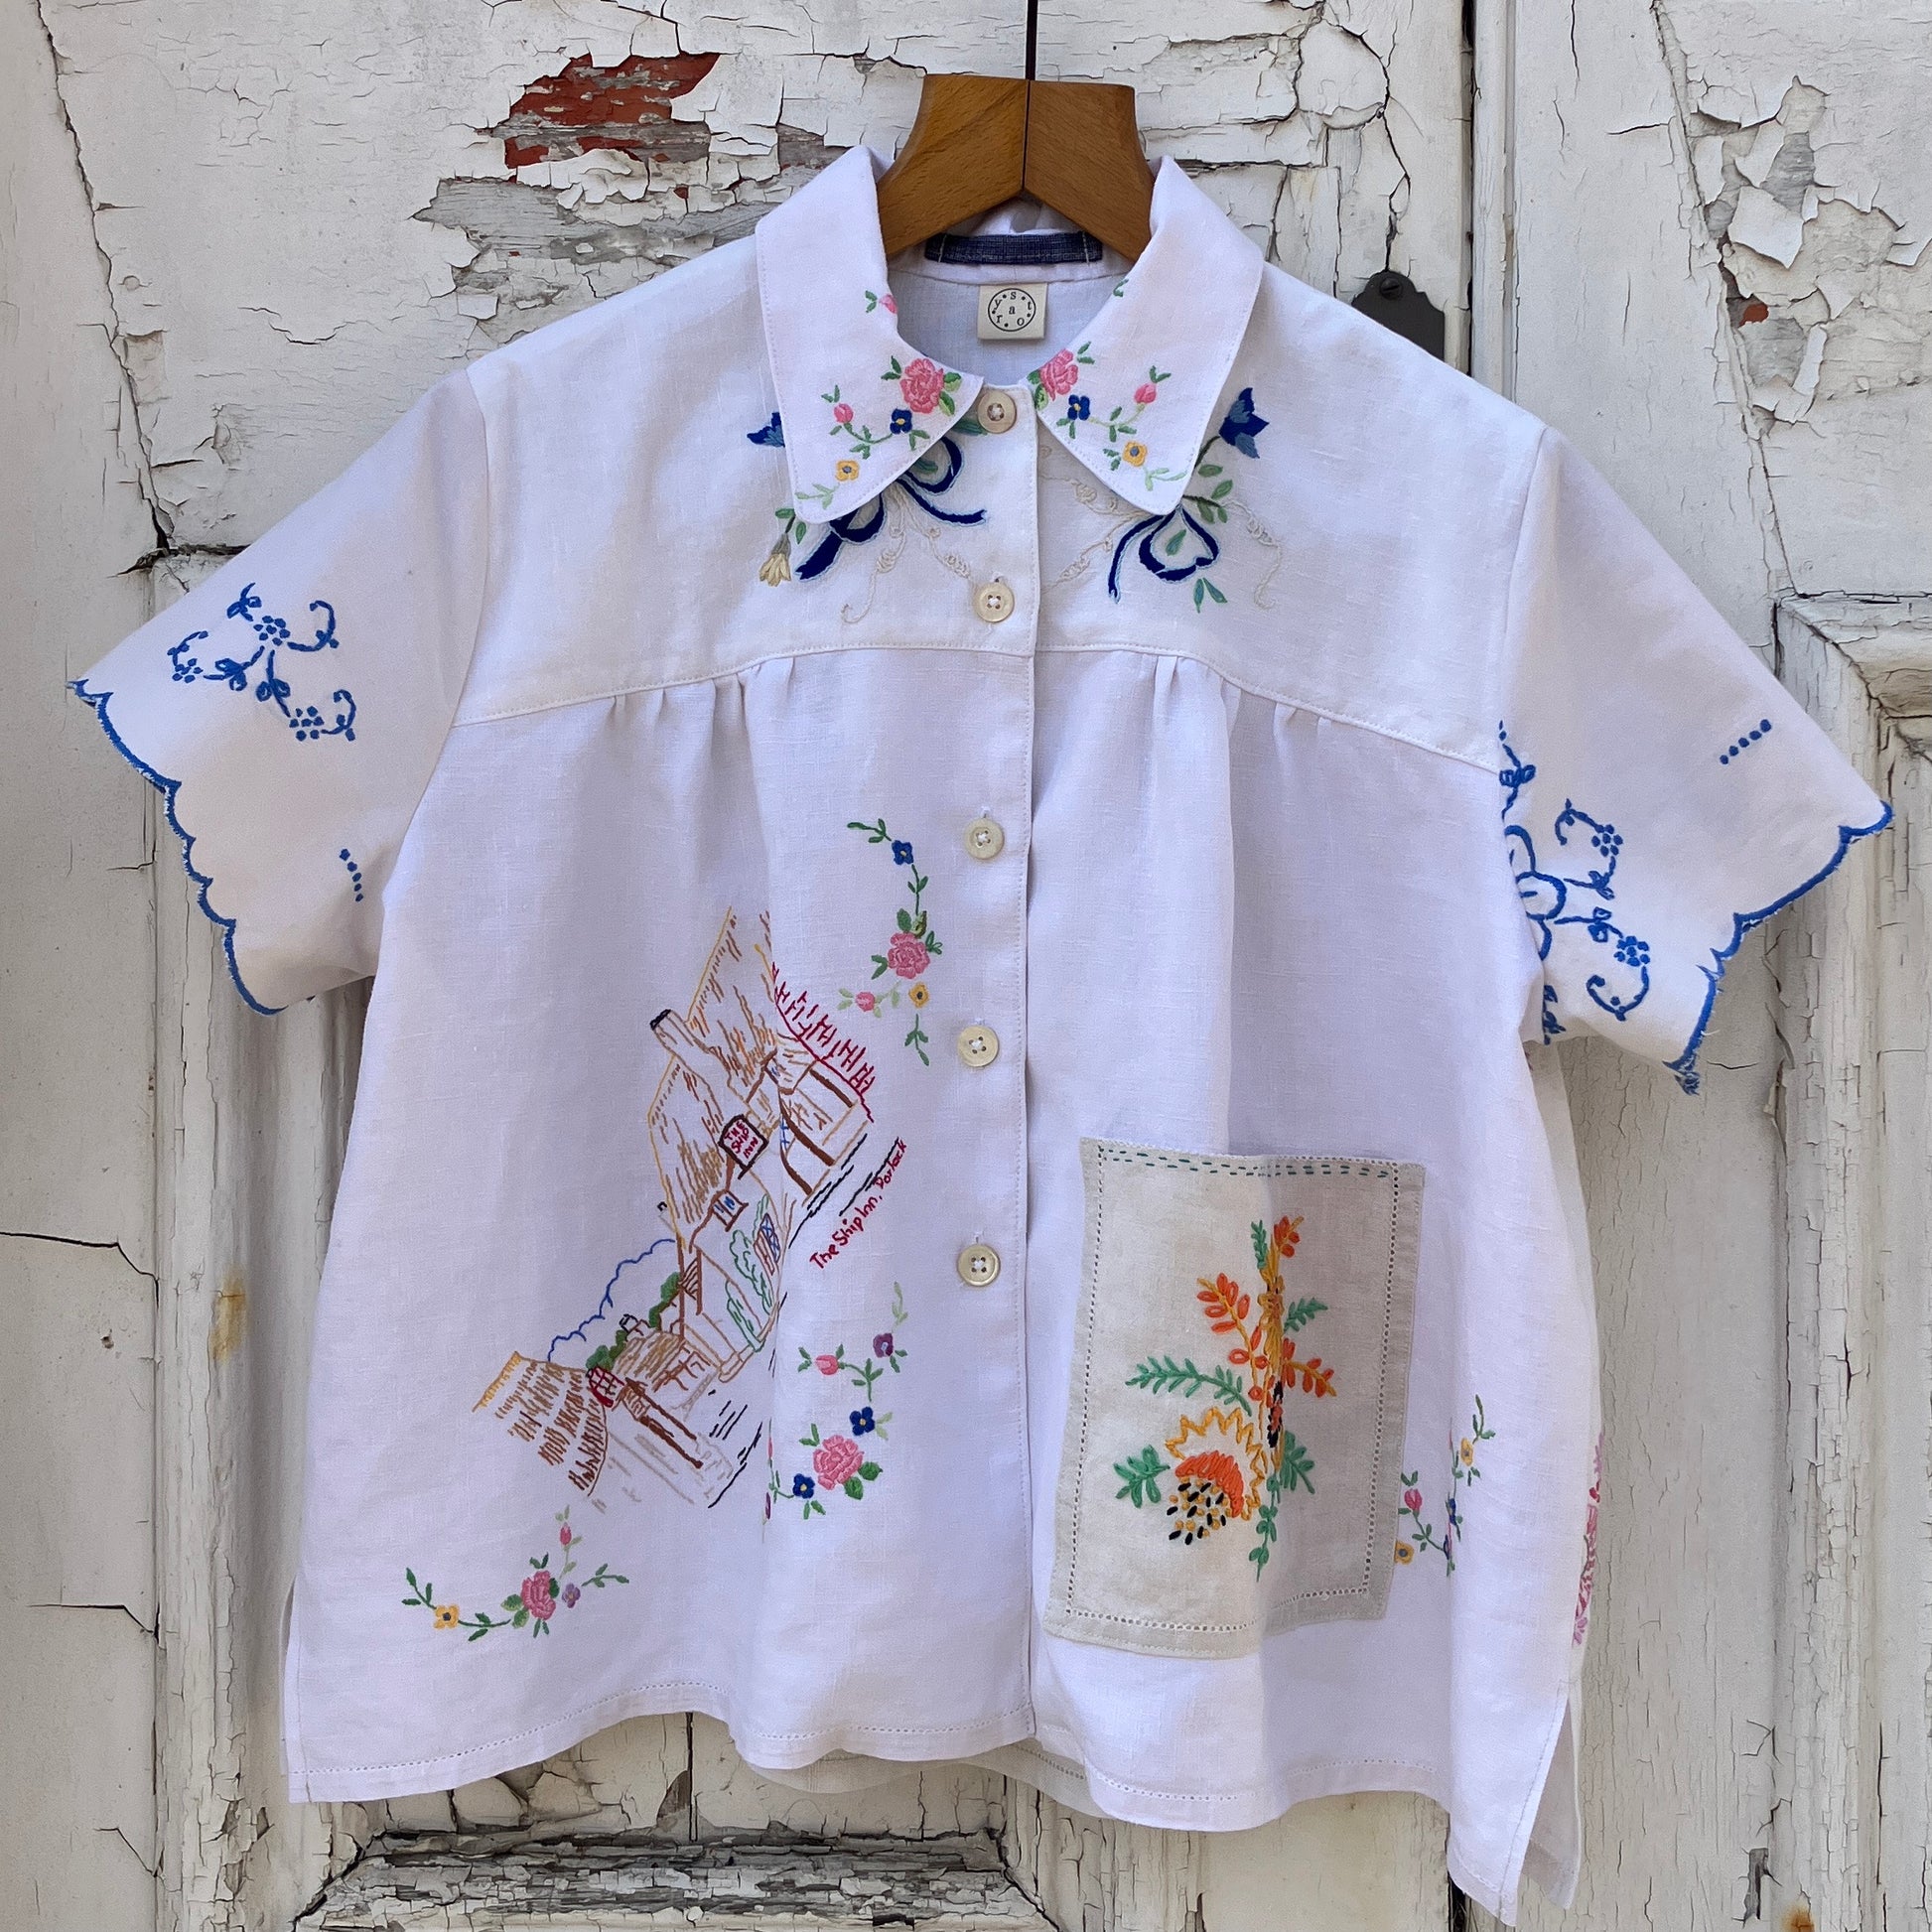 Short sleeved shirt made from a patchwork of reclaimed tablecloths with a traditional English pub with a thatched roof embroidered on the front and two bows on the yoke